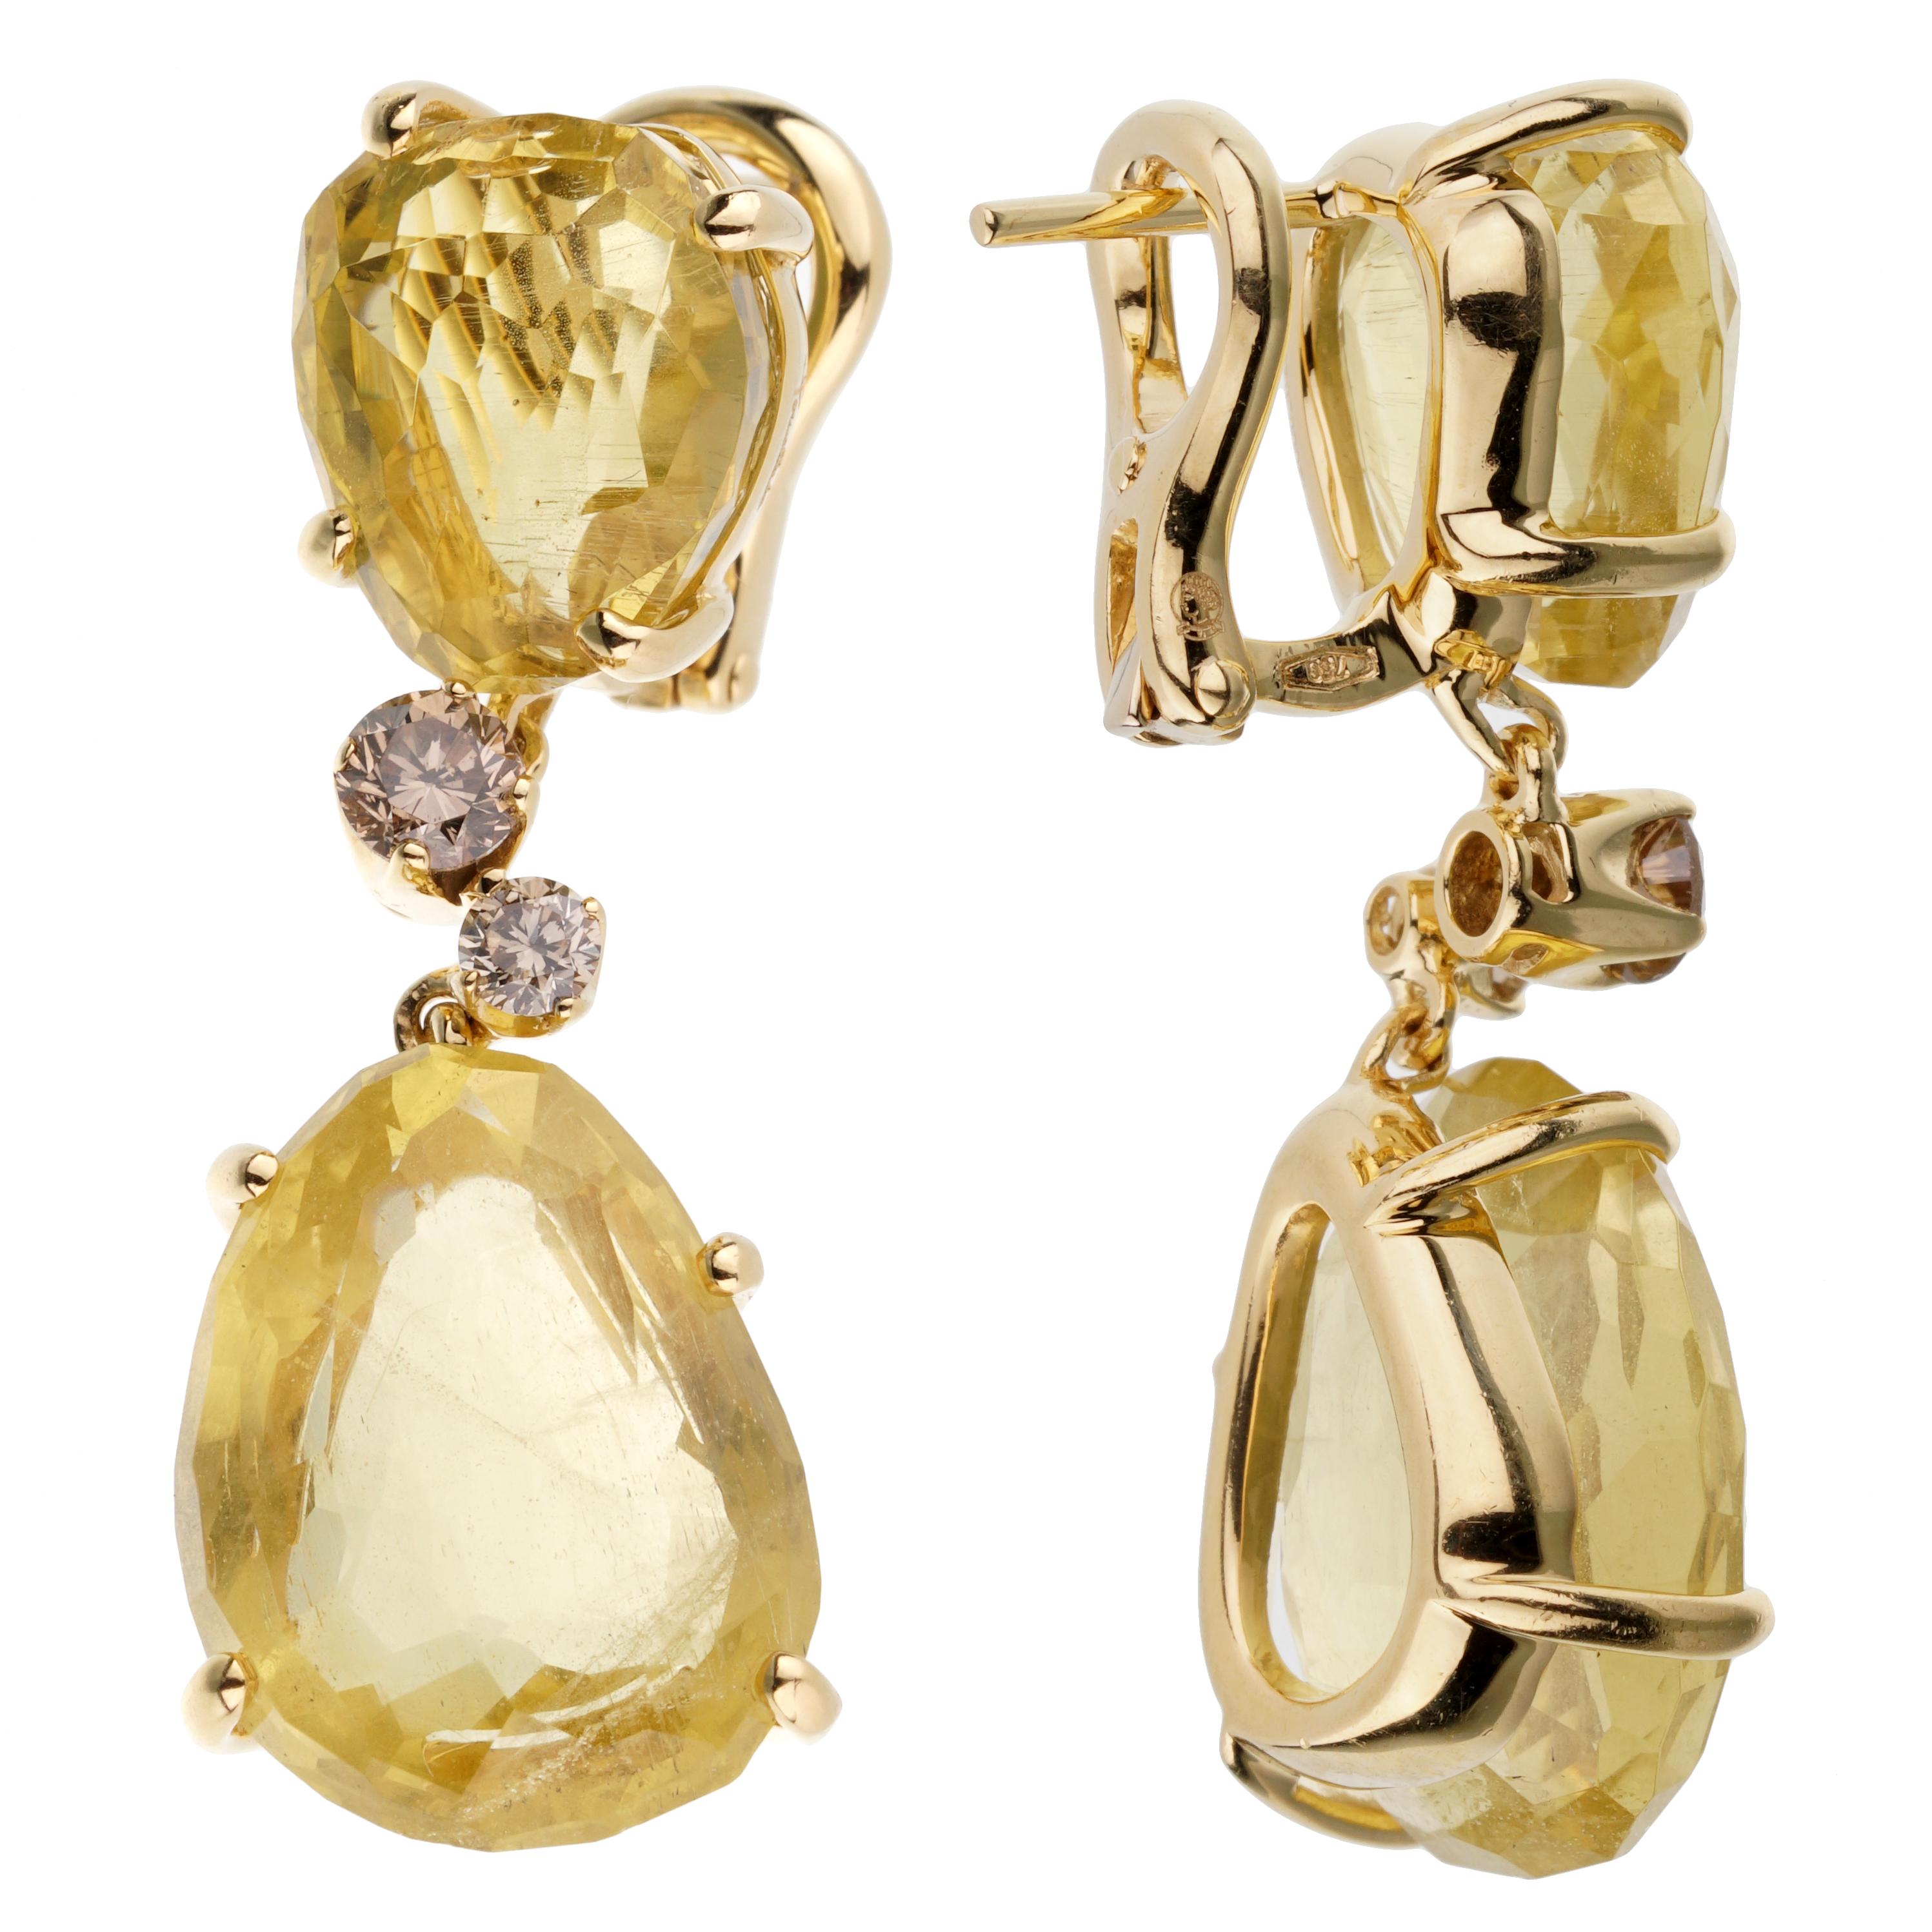 A fabulous pair of authentic Pomellato drop earrings showcasing 12cts of Lemon Quartz separated by .46ct of round brilliant cut champagne diamonds.

Retail Price: $21,000+ Tax